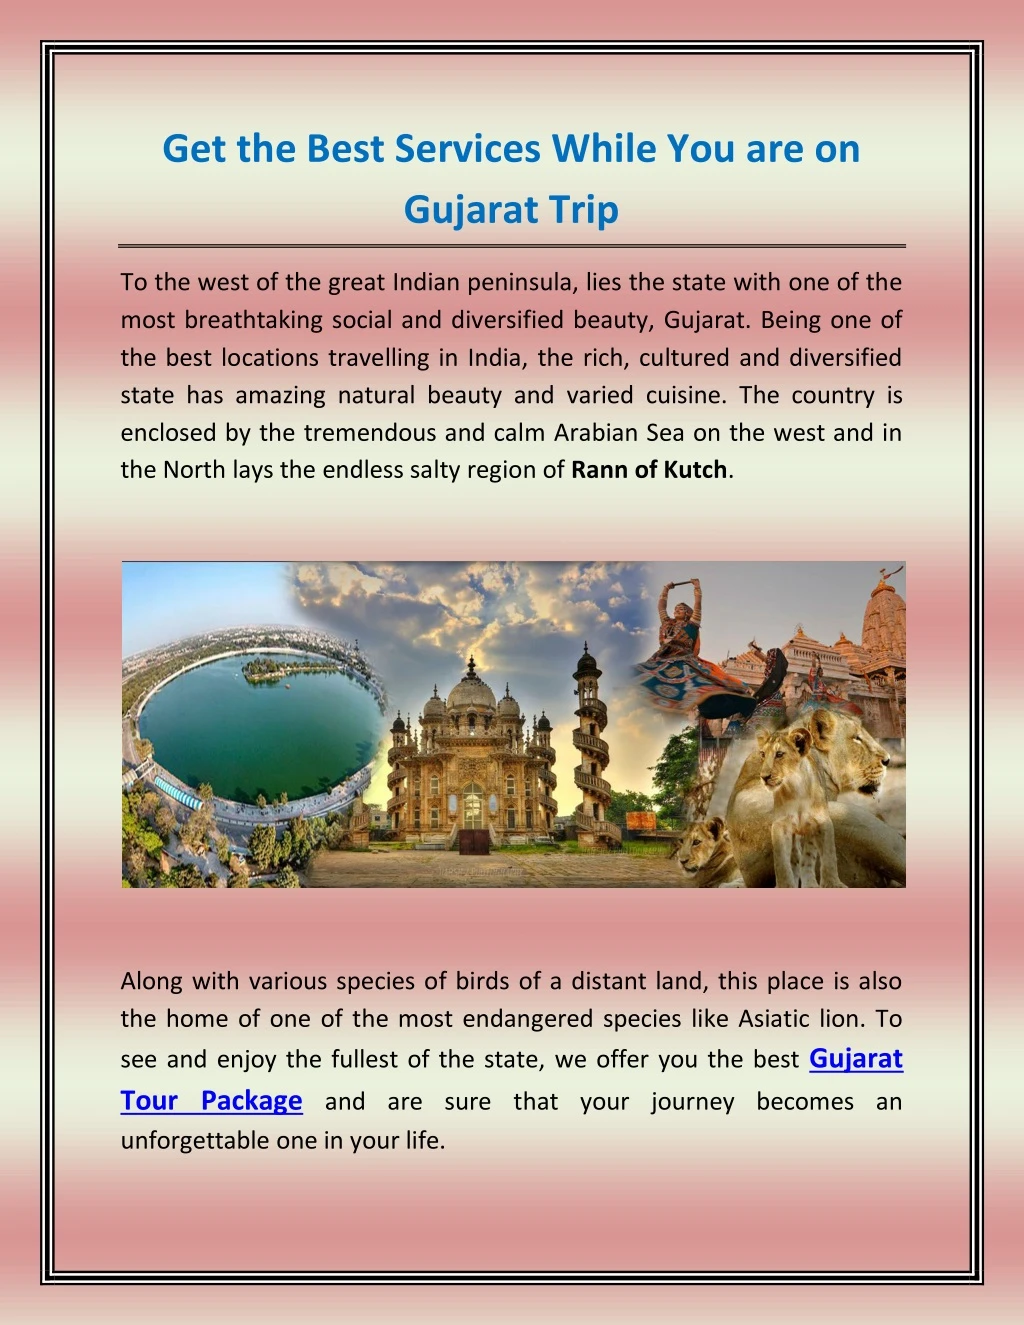 get the best services while you are on gujarat